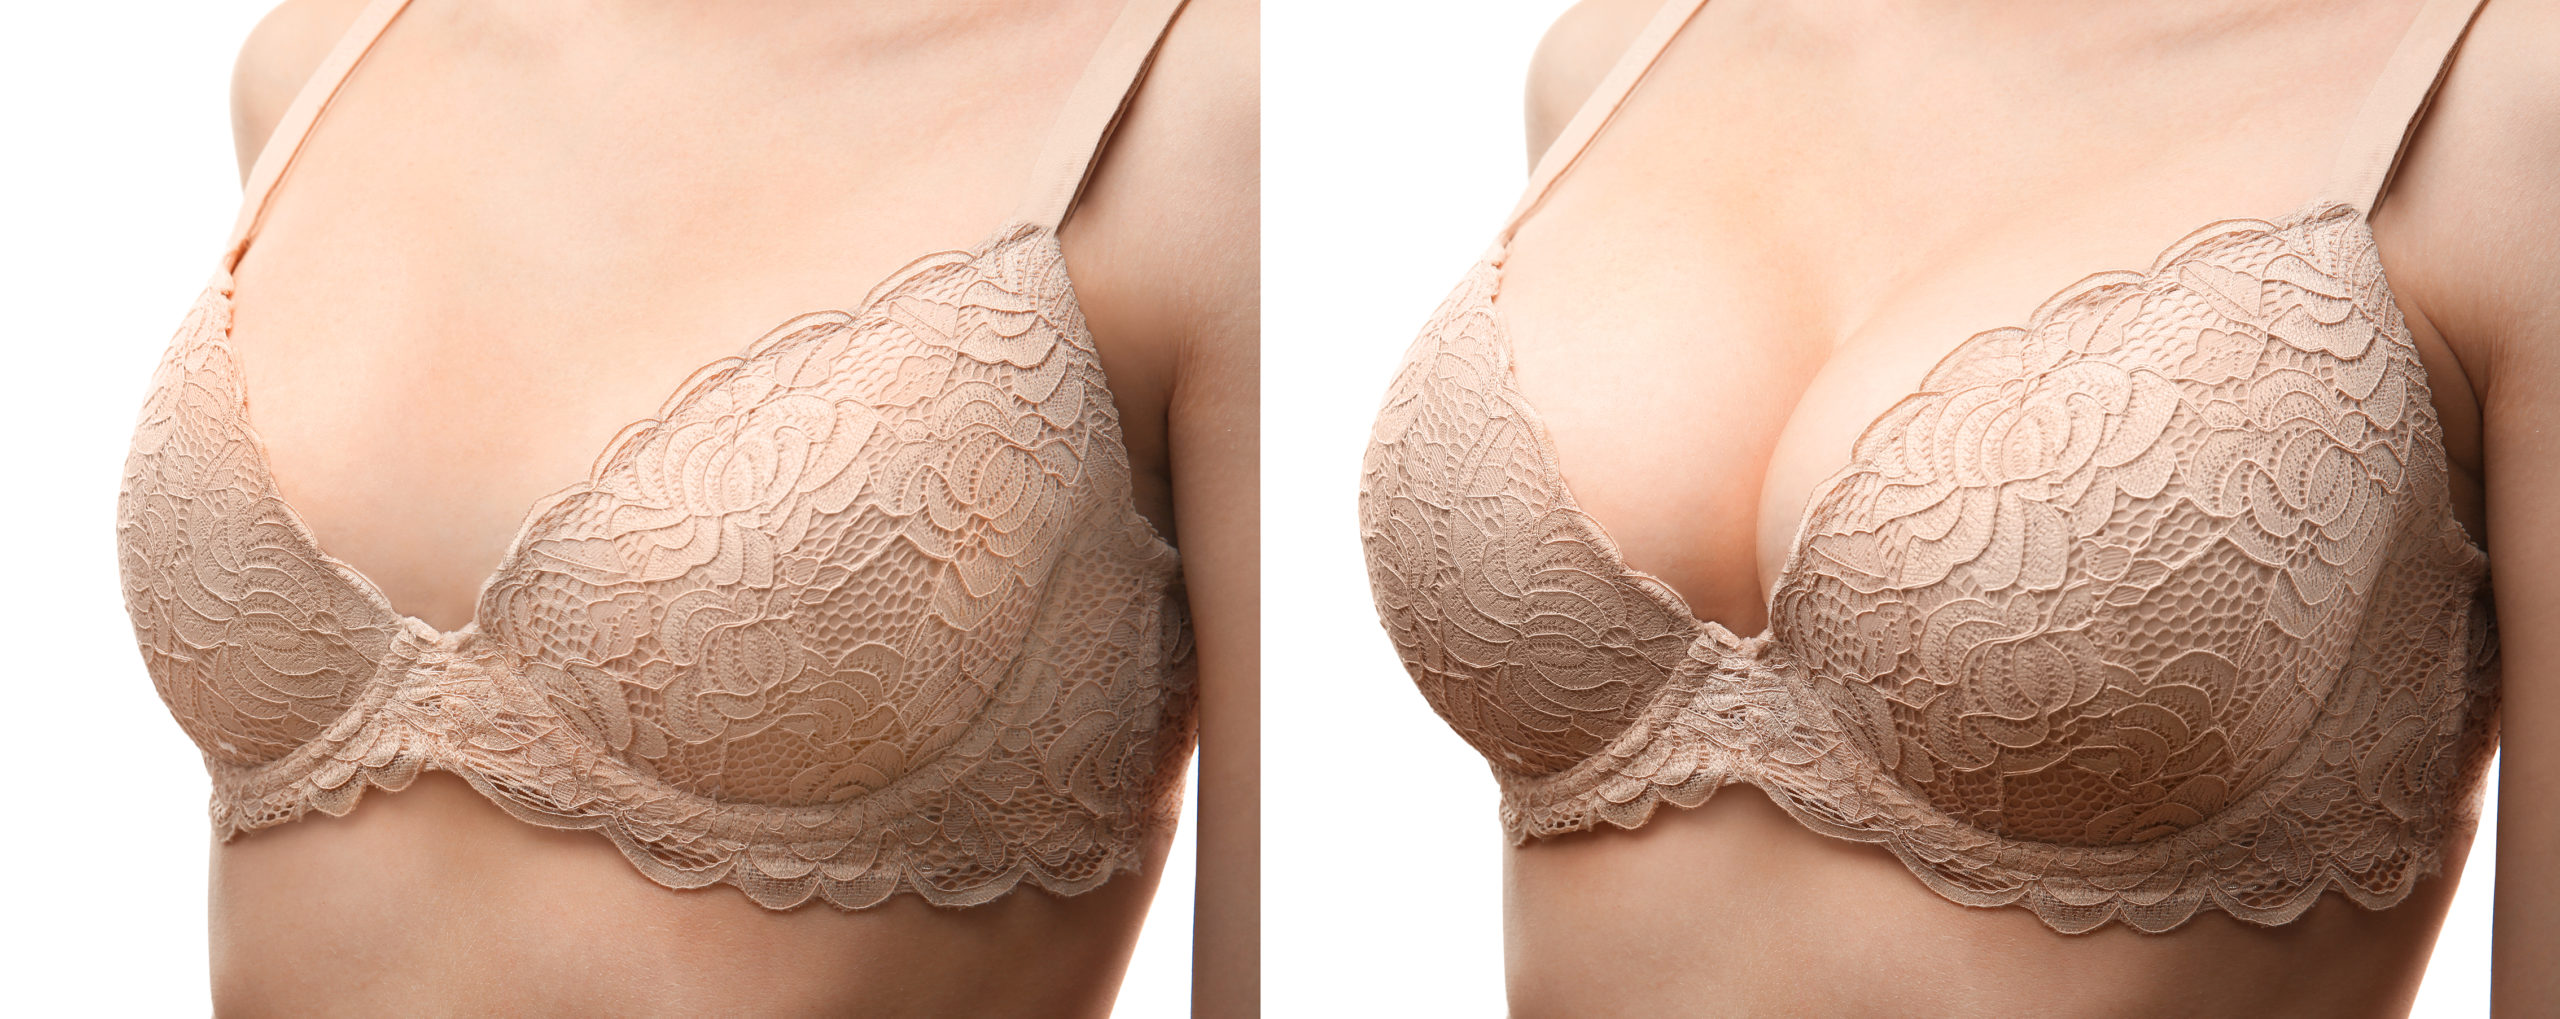 How Long Does Breast Augmentation Surgery Take?, Winter Park Breast  Augmentation & Breast Implants